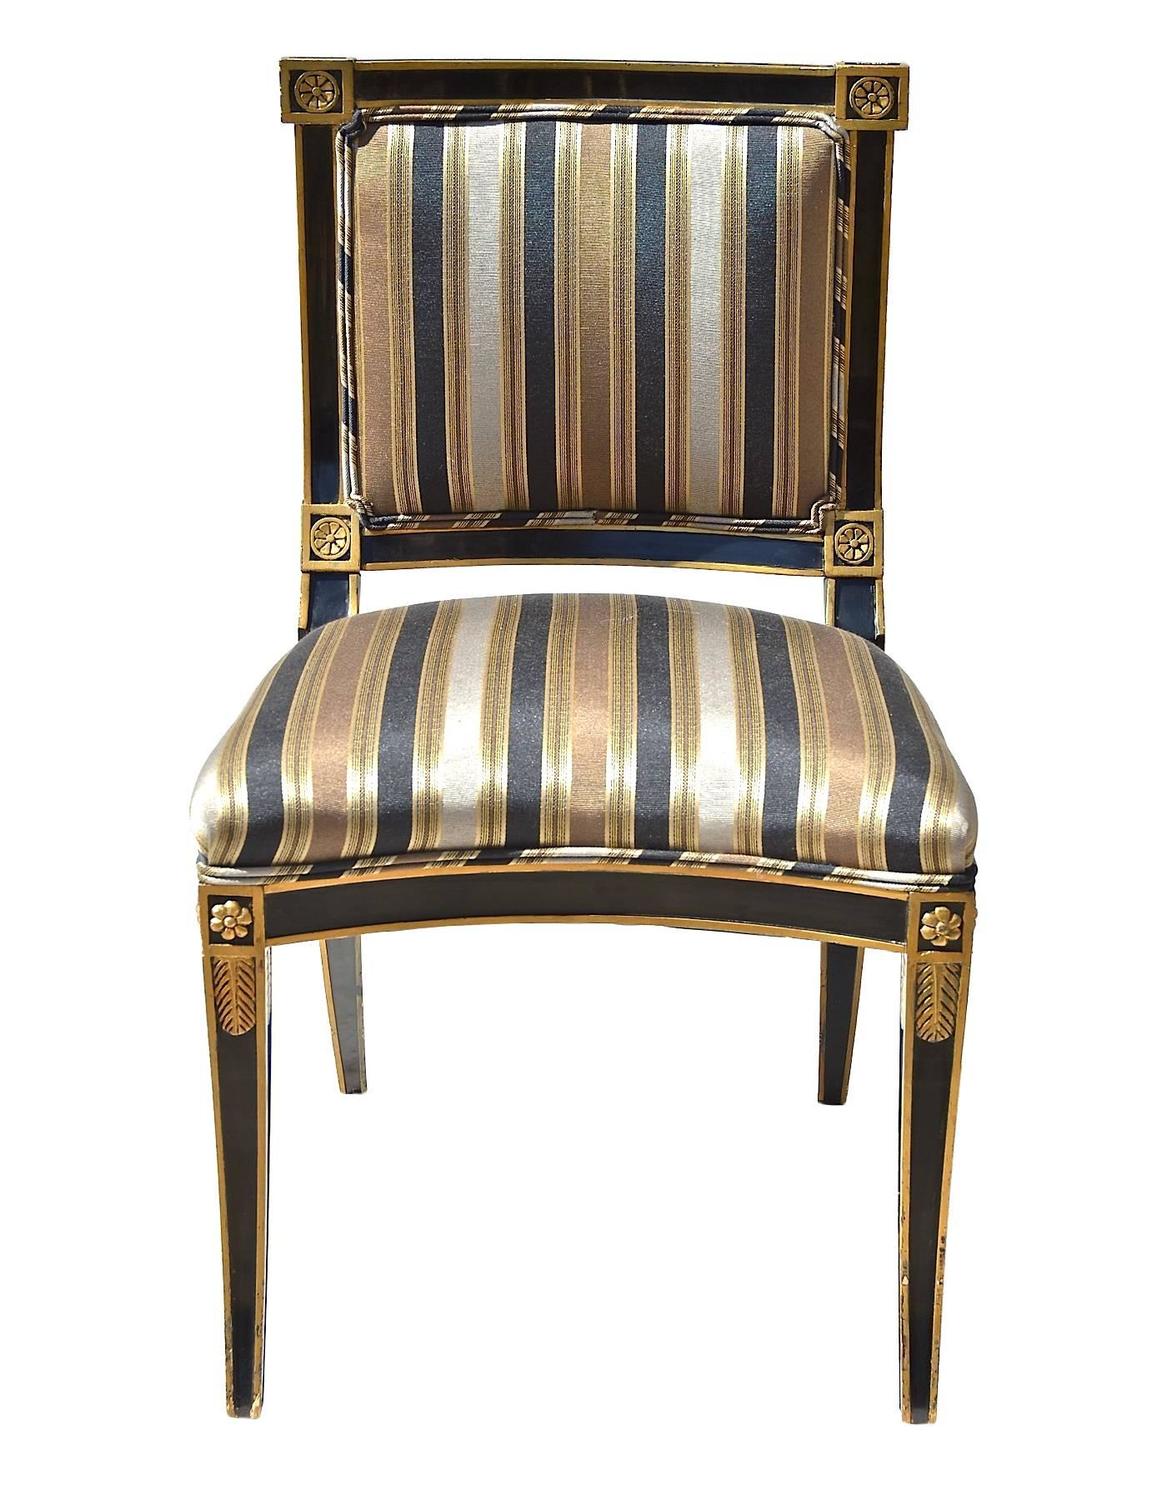 Classical Style Chairs in Black and Gold at 1stdibs